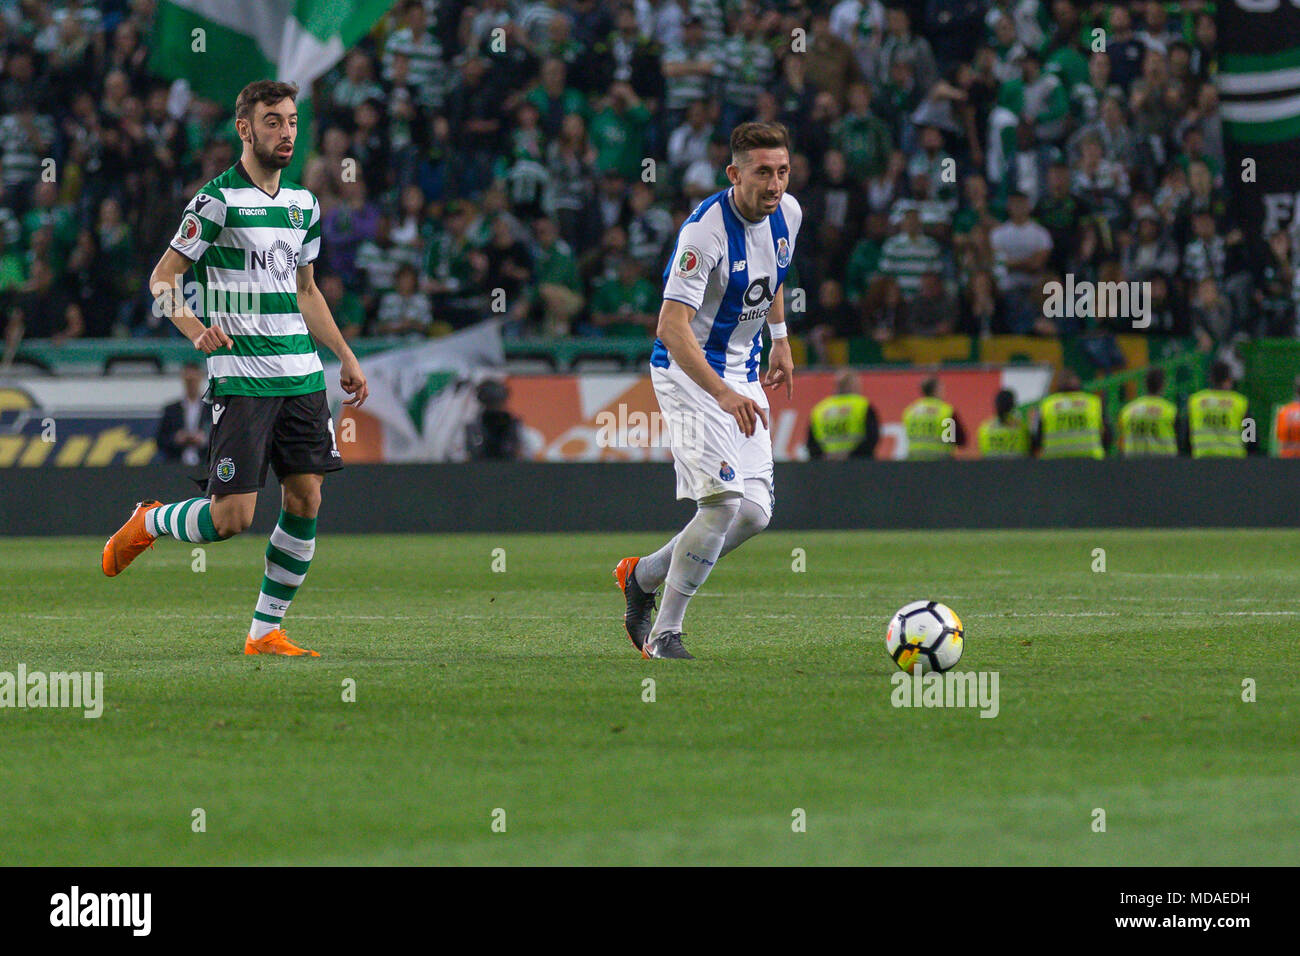 April 18, 2018. Lisbon, Portugal. PortoÕs midfielder from Mexico Hector Herrera (16) in action during the game Sporting CP vs FC Porto © Alexandre de Sousa/Alamy Live News Stock Photo